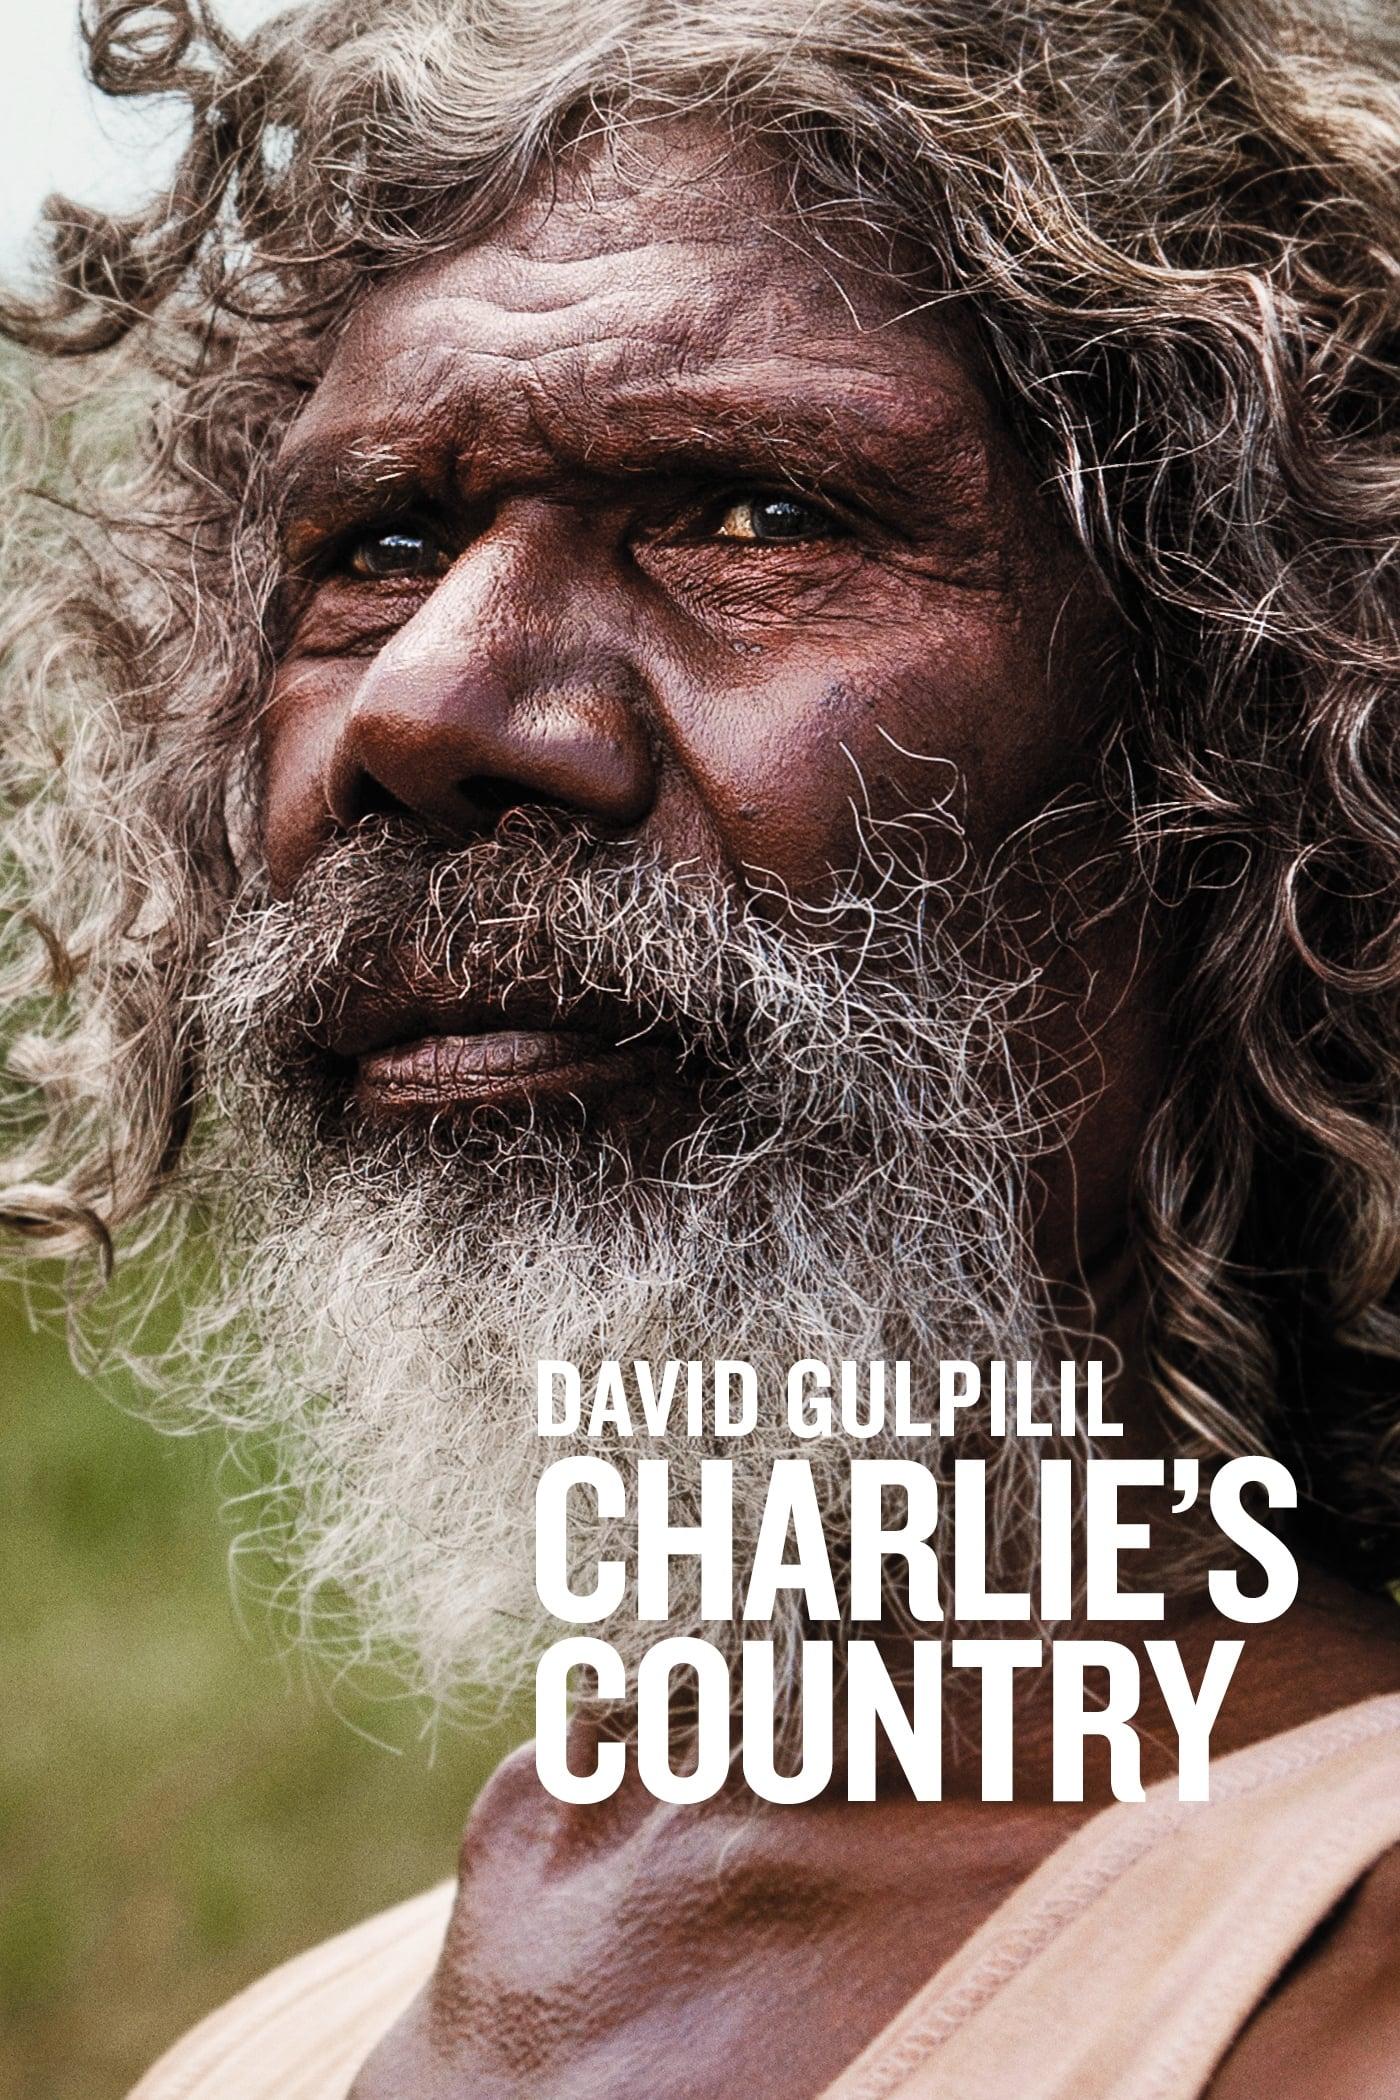 Charlie's Country poster